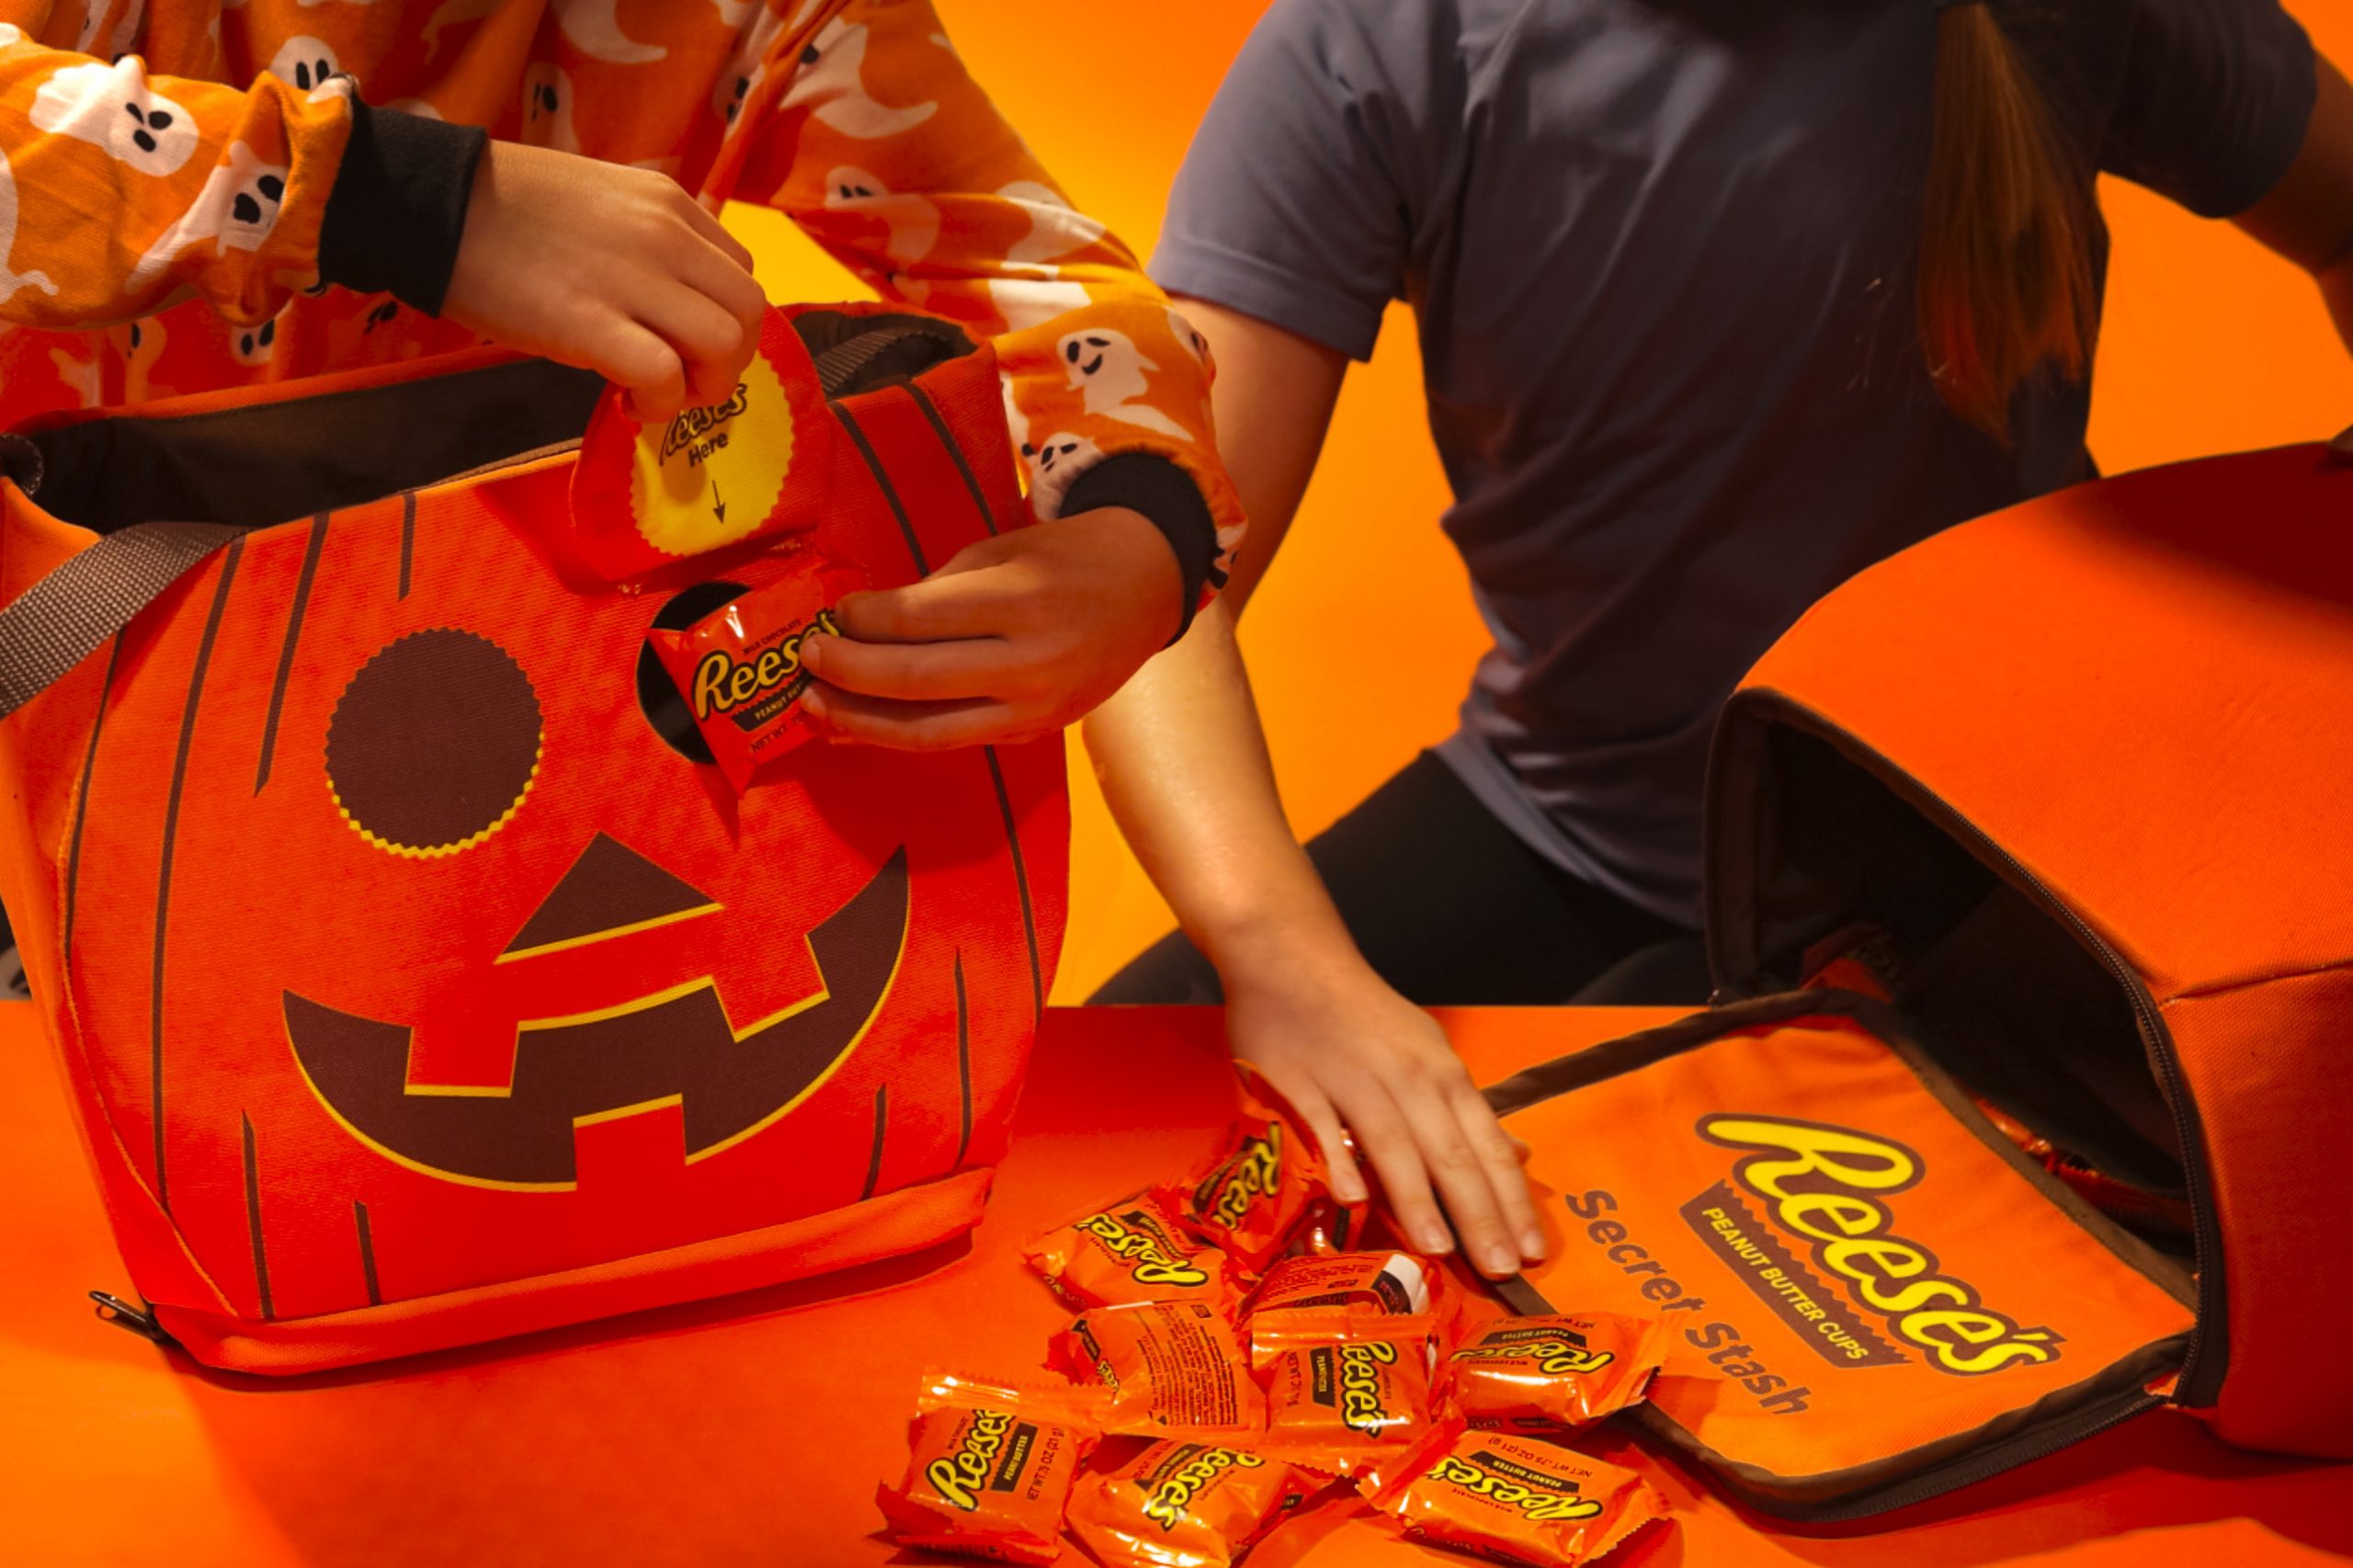 reese's, halloween candy